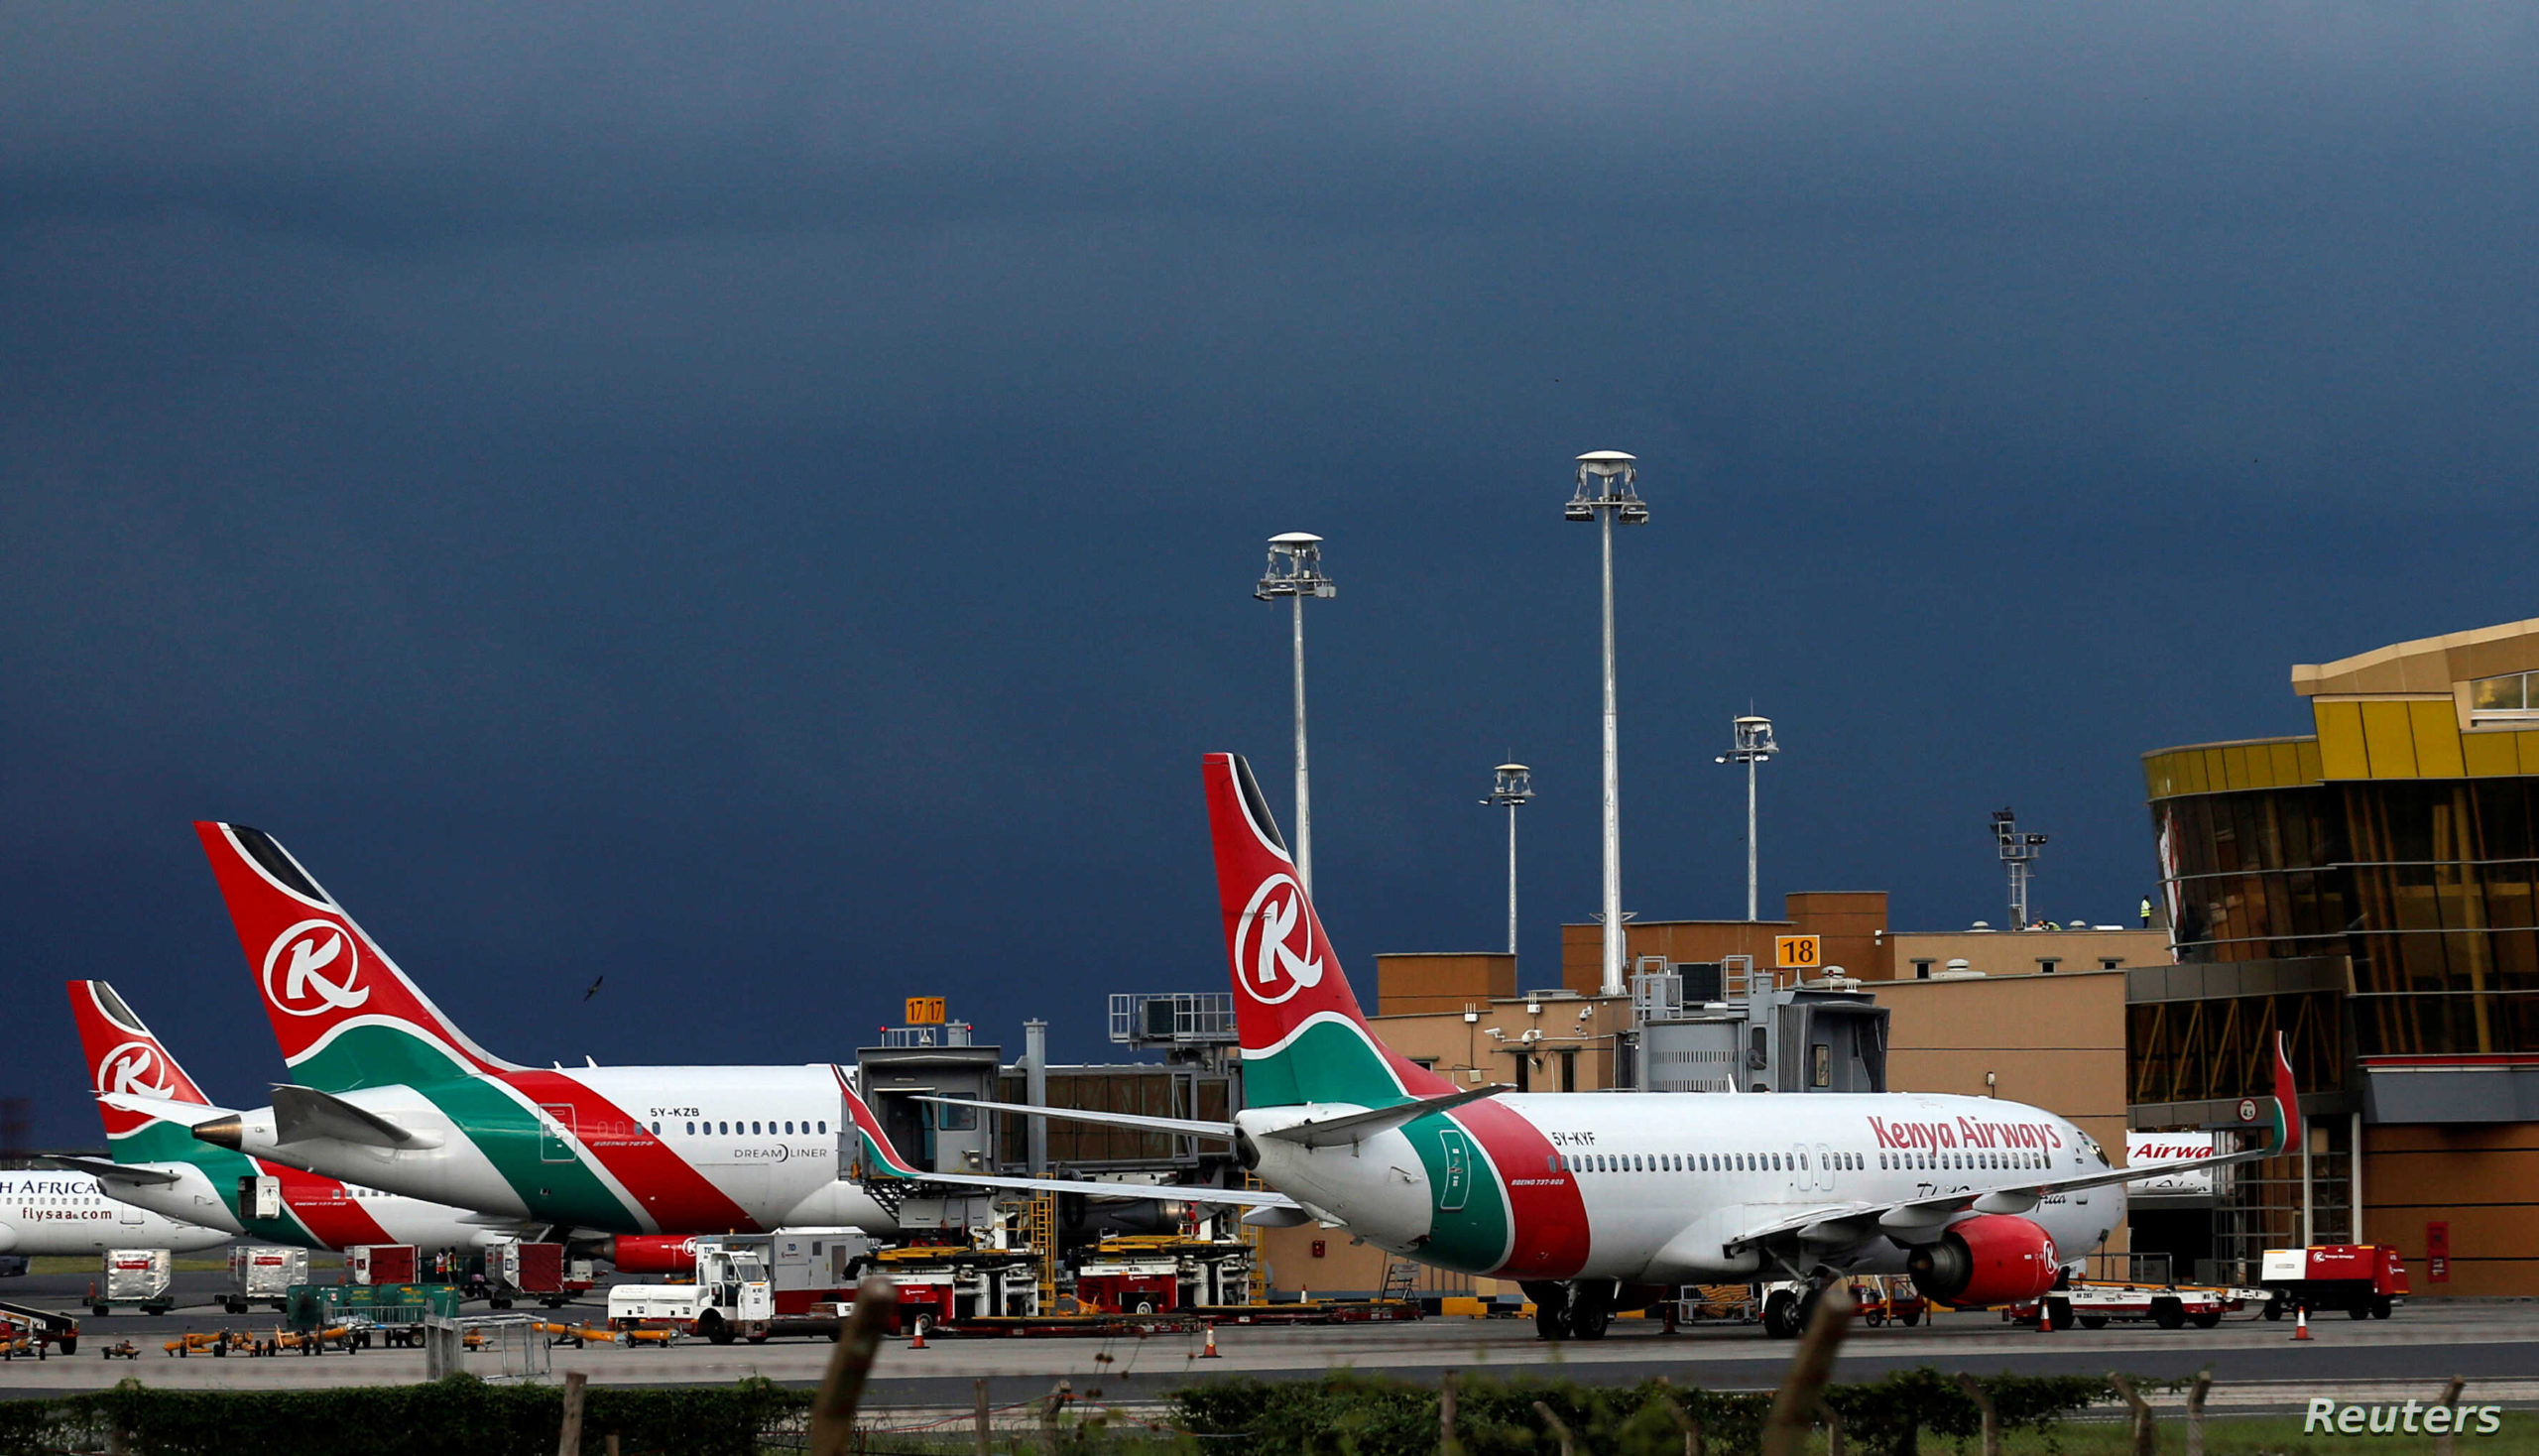 Kenya Airways joins Skyteam member airlines for the sustainable flight - Travel News, Insights & Resources.